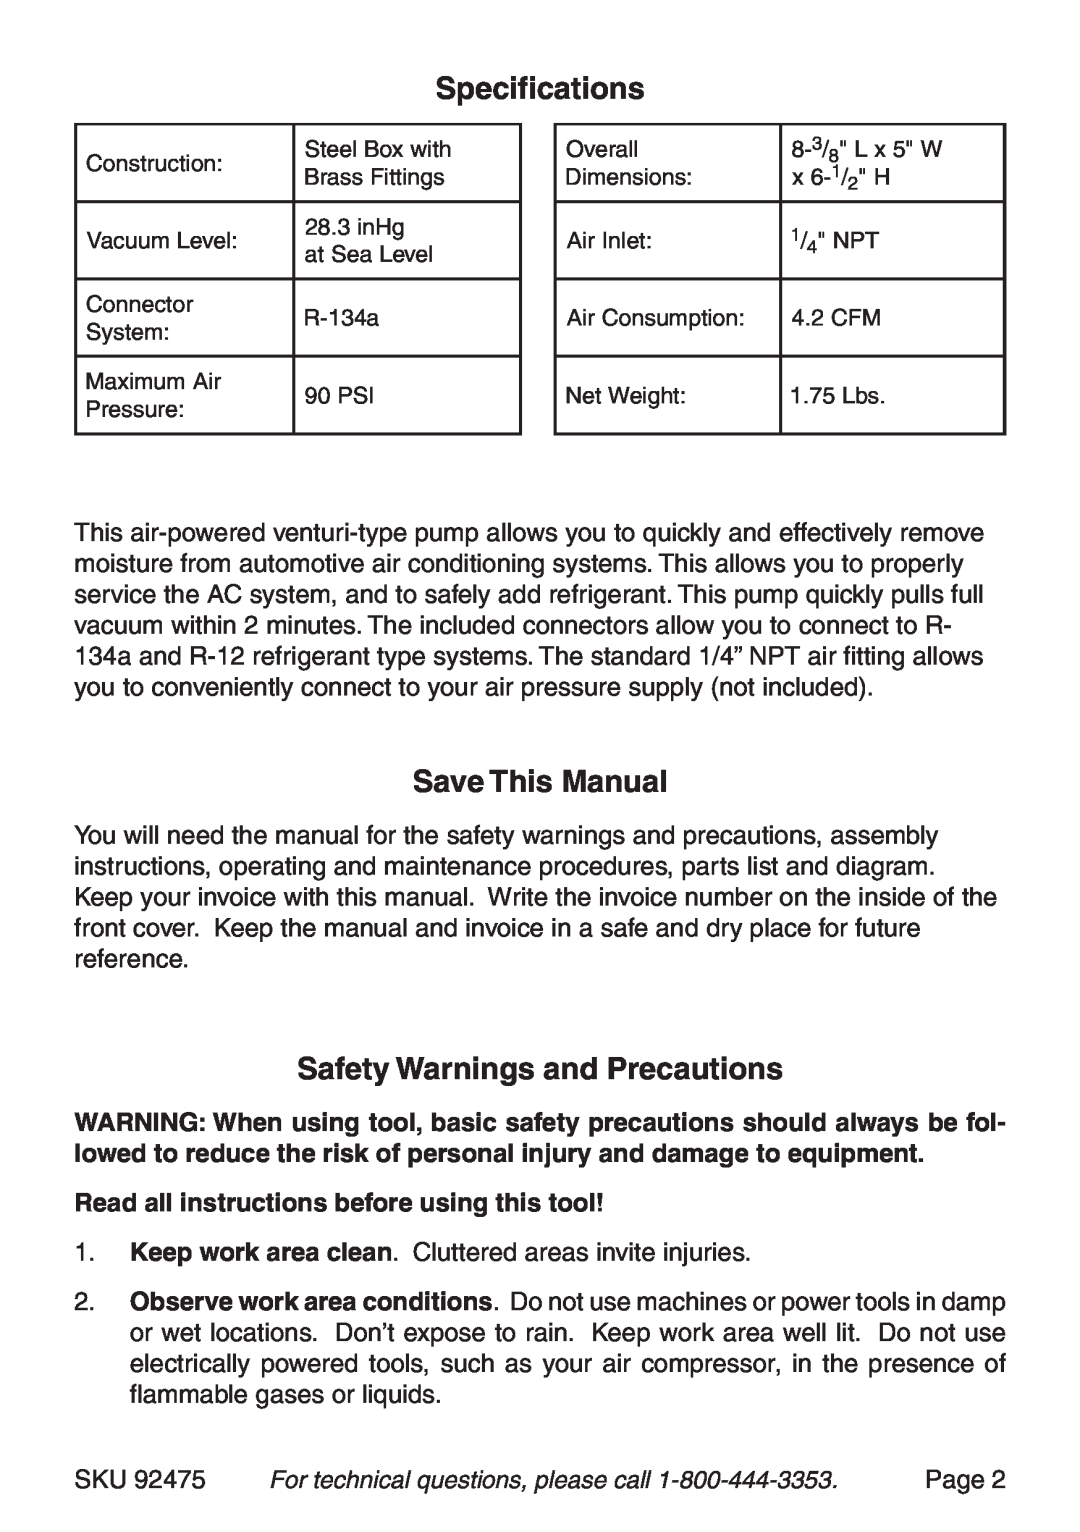 Harbor Freight Tools 92475 manual Specifications, Save This Manual, Safety Warnings and Precautions 